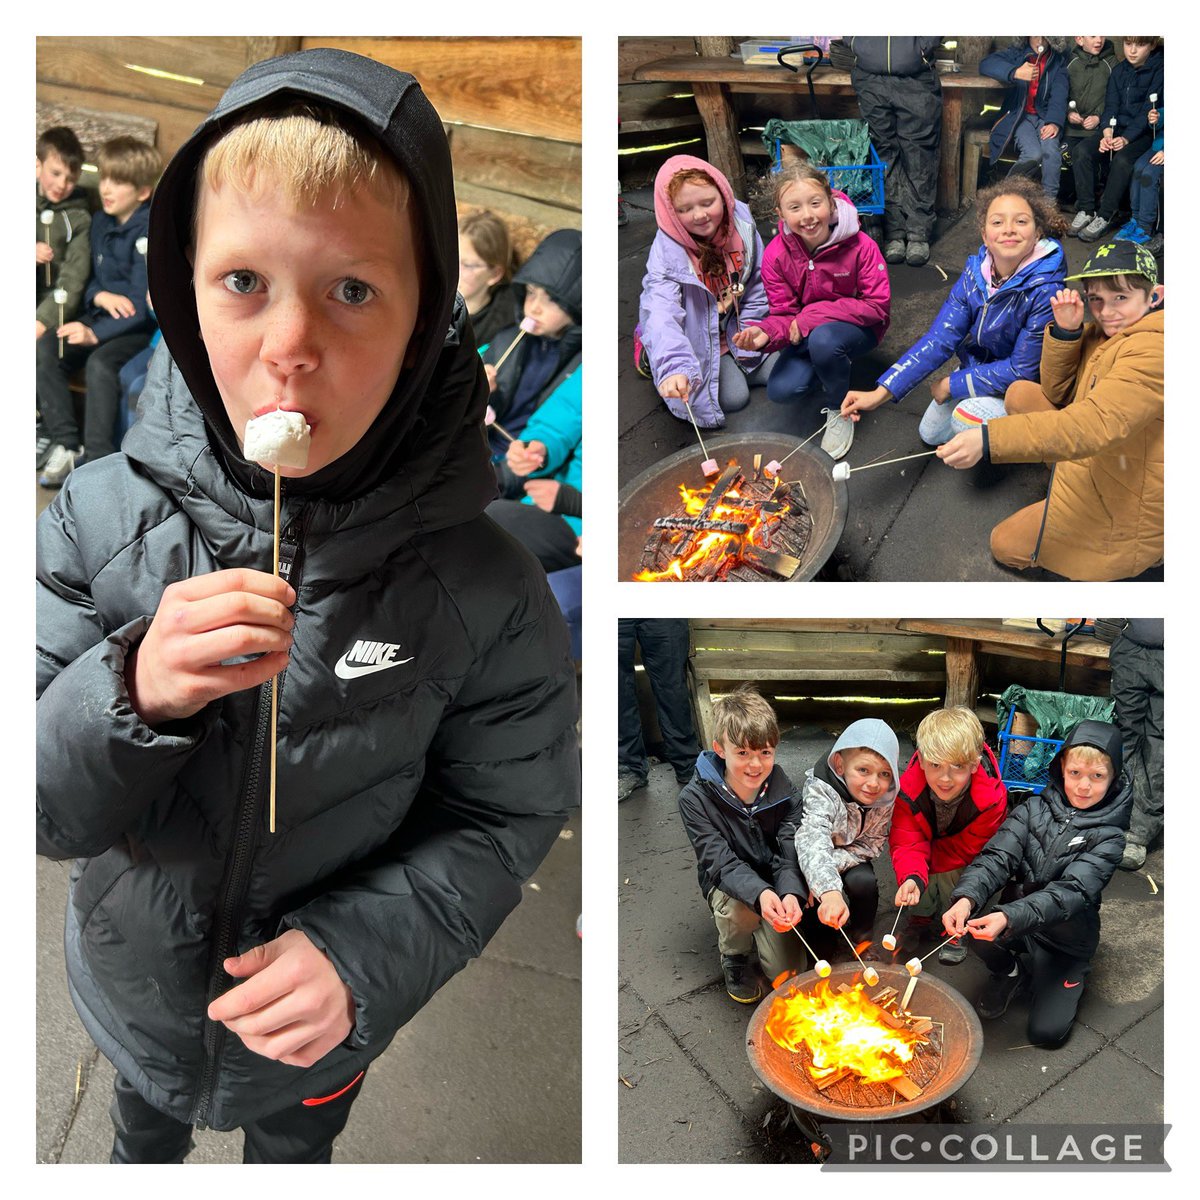 We had fun this morning with the Bushcraft and roasting Marshmallows!